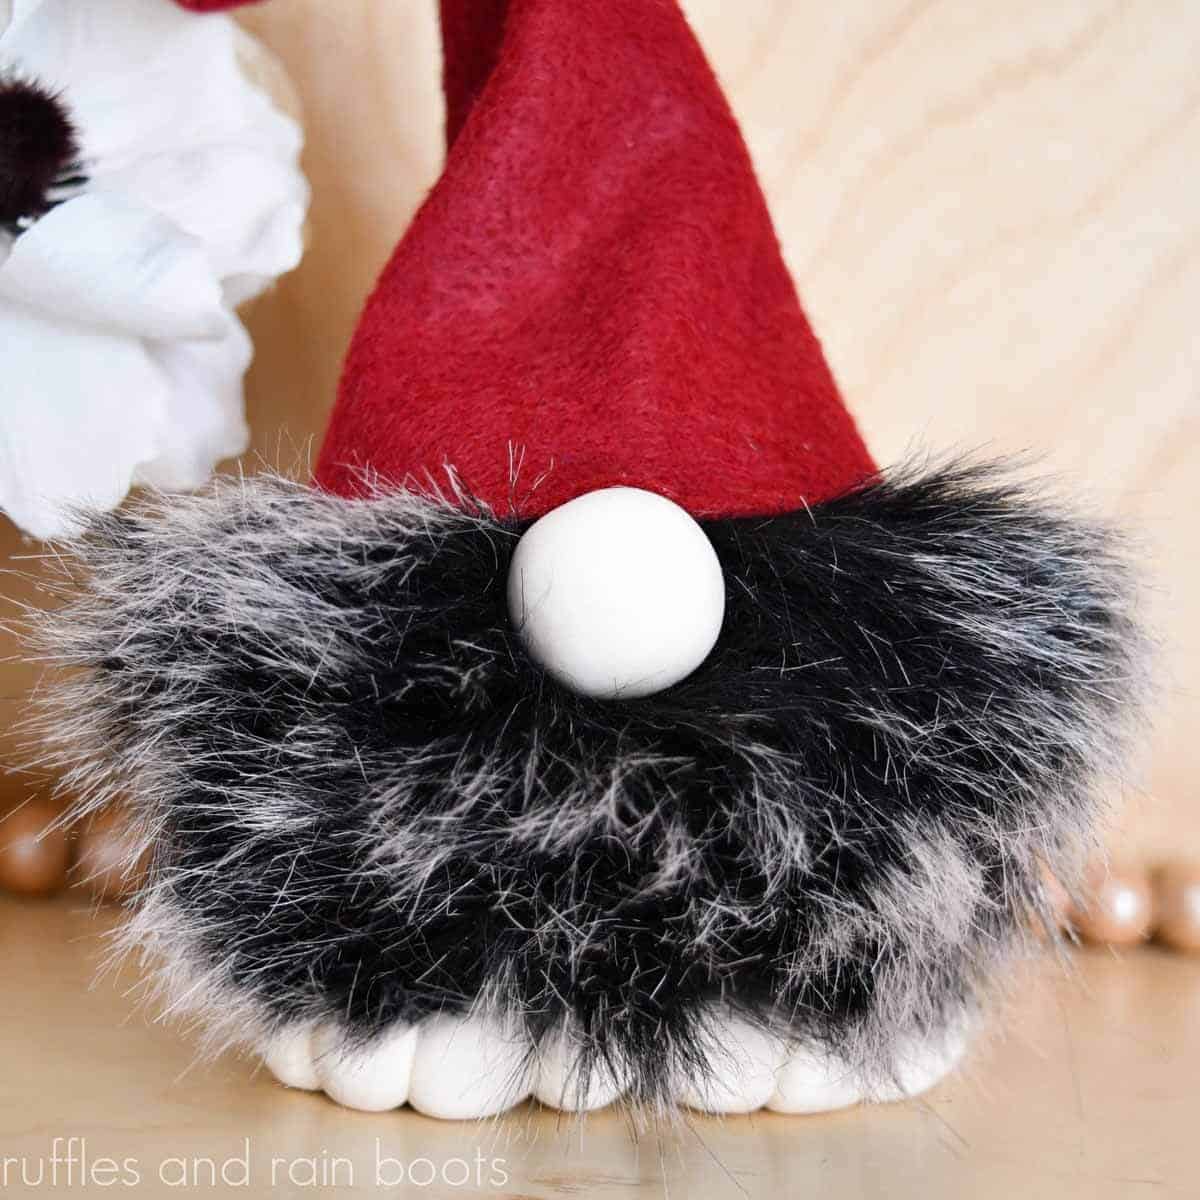 Square close up image of a black and white fur pompom gnome with clay feet, nose, and a red, twisty felt hat.